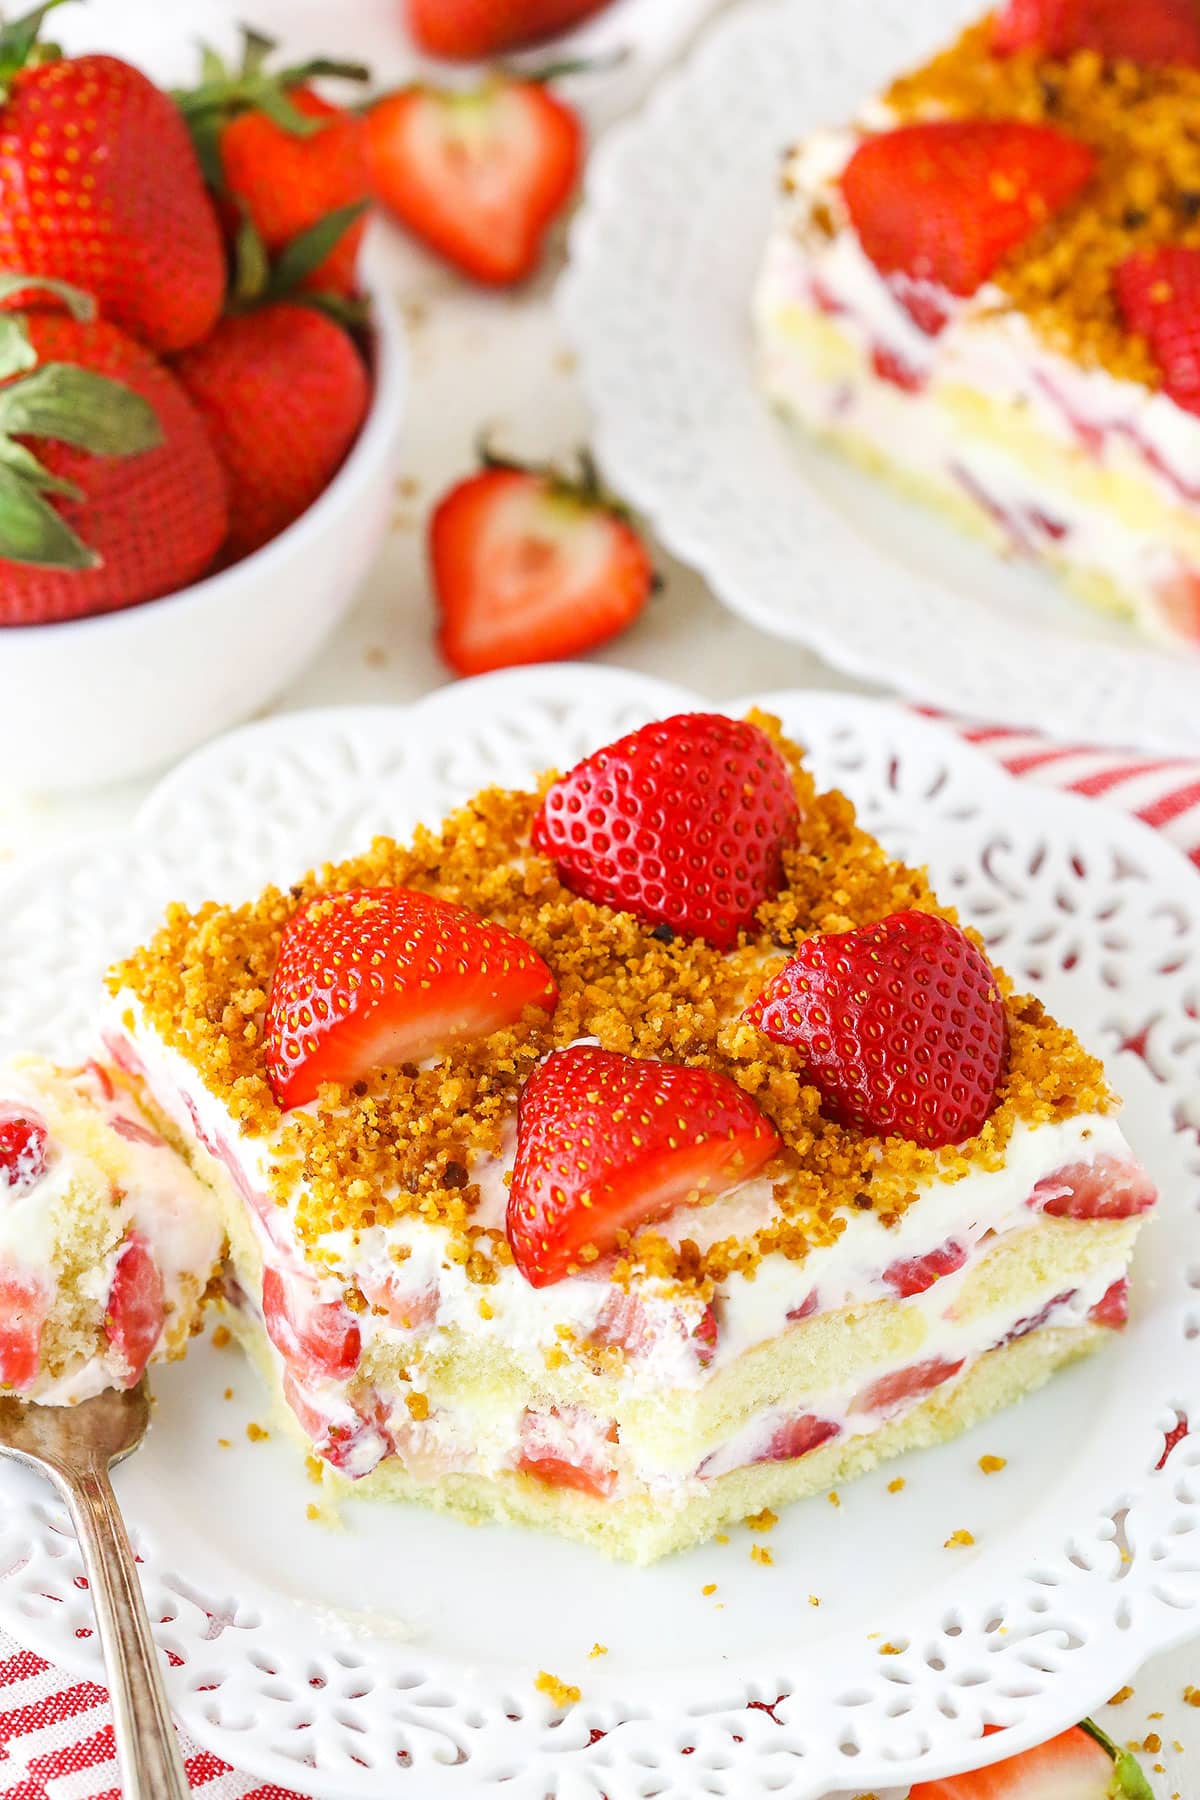 Slice of strawberry cake with graham cracker crumbs on top.